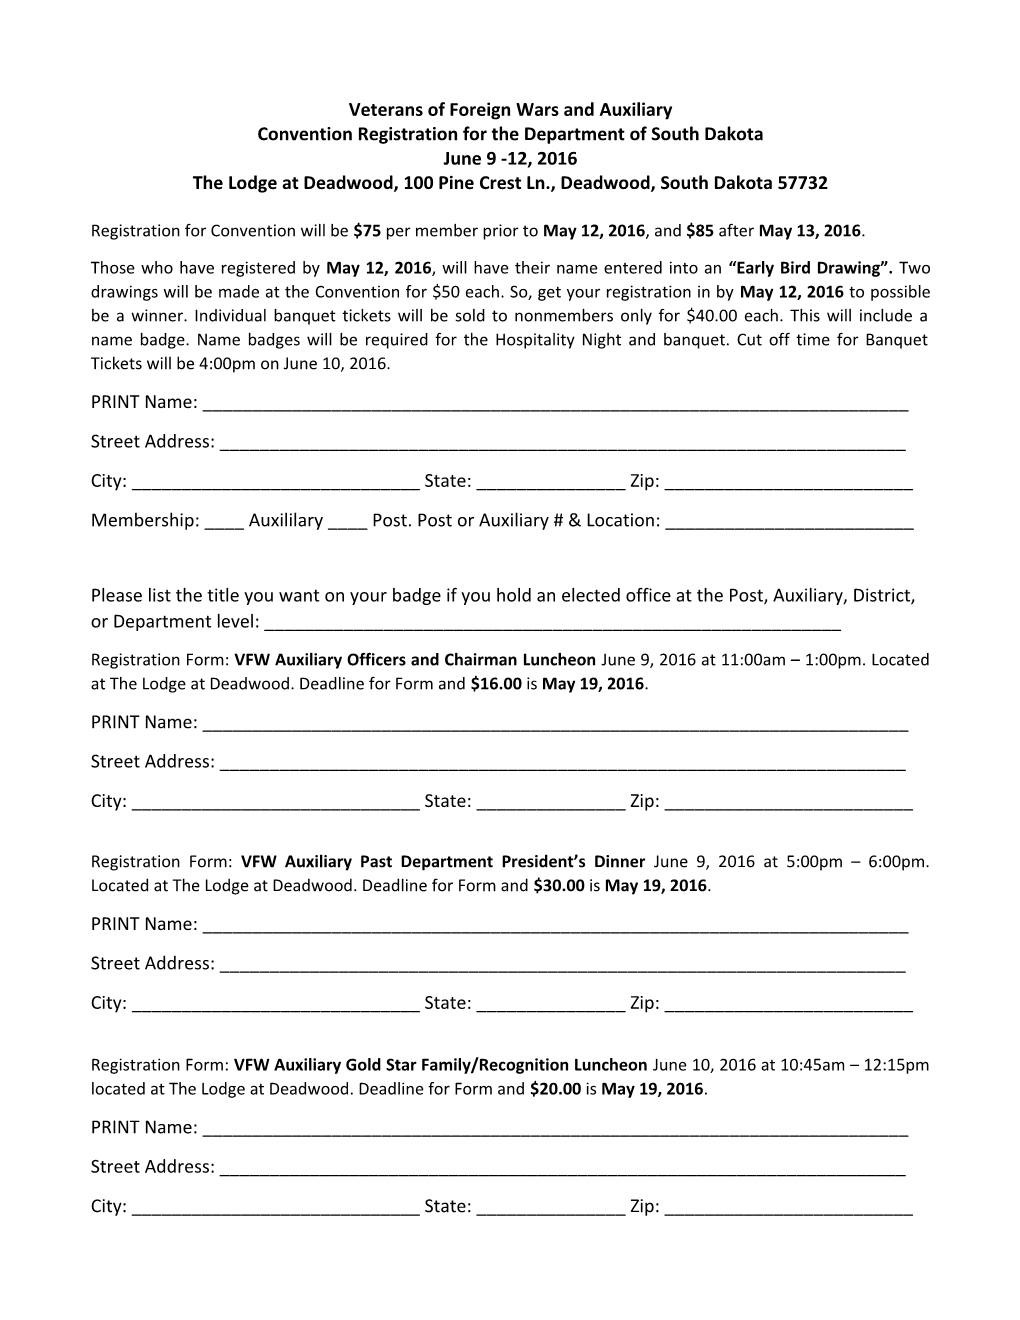 Convention Registration for the Department of South Dakota